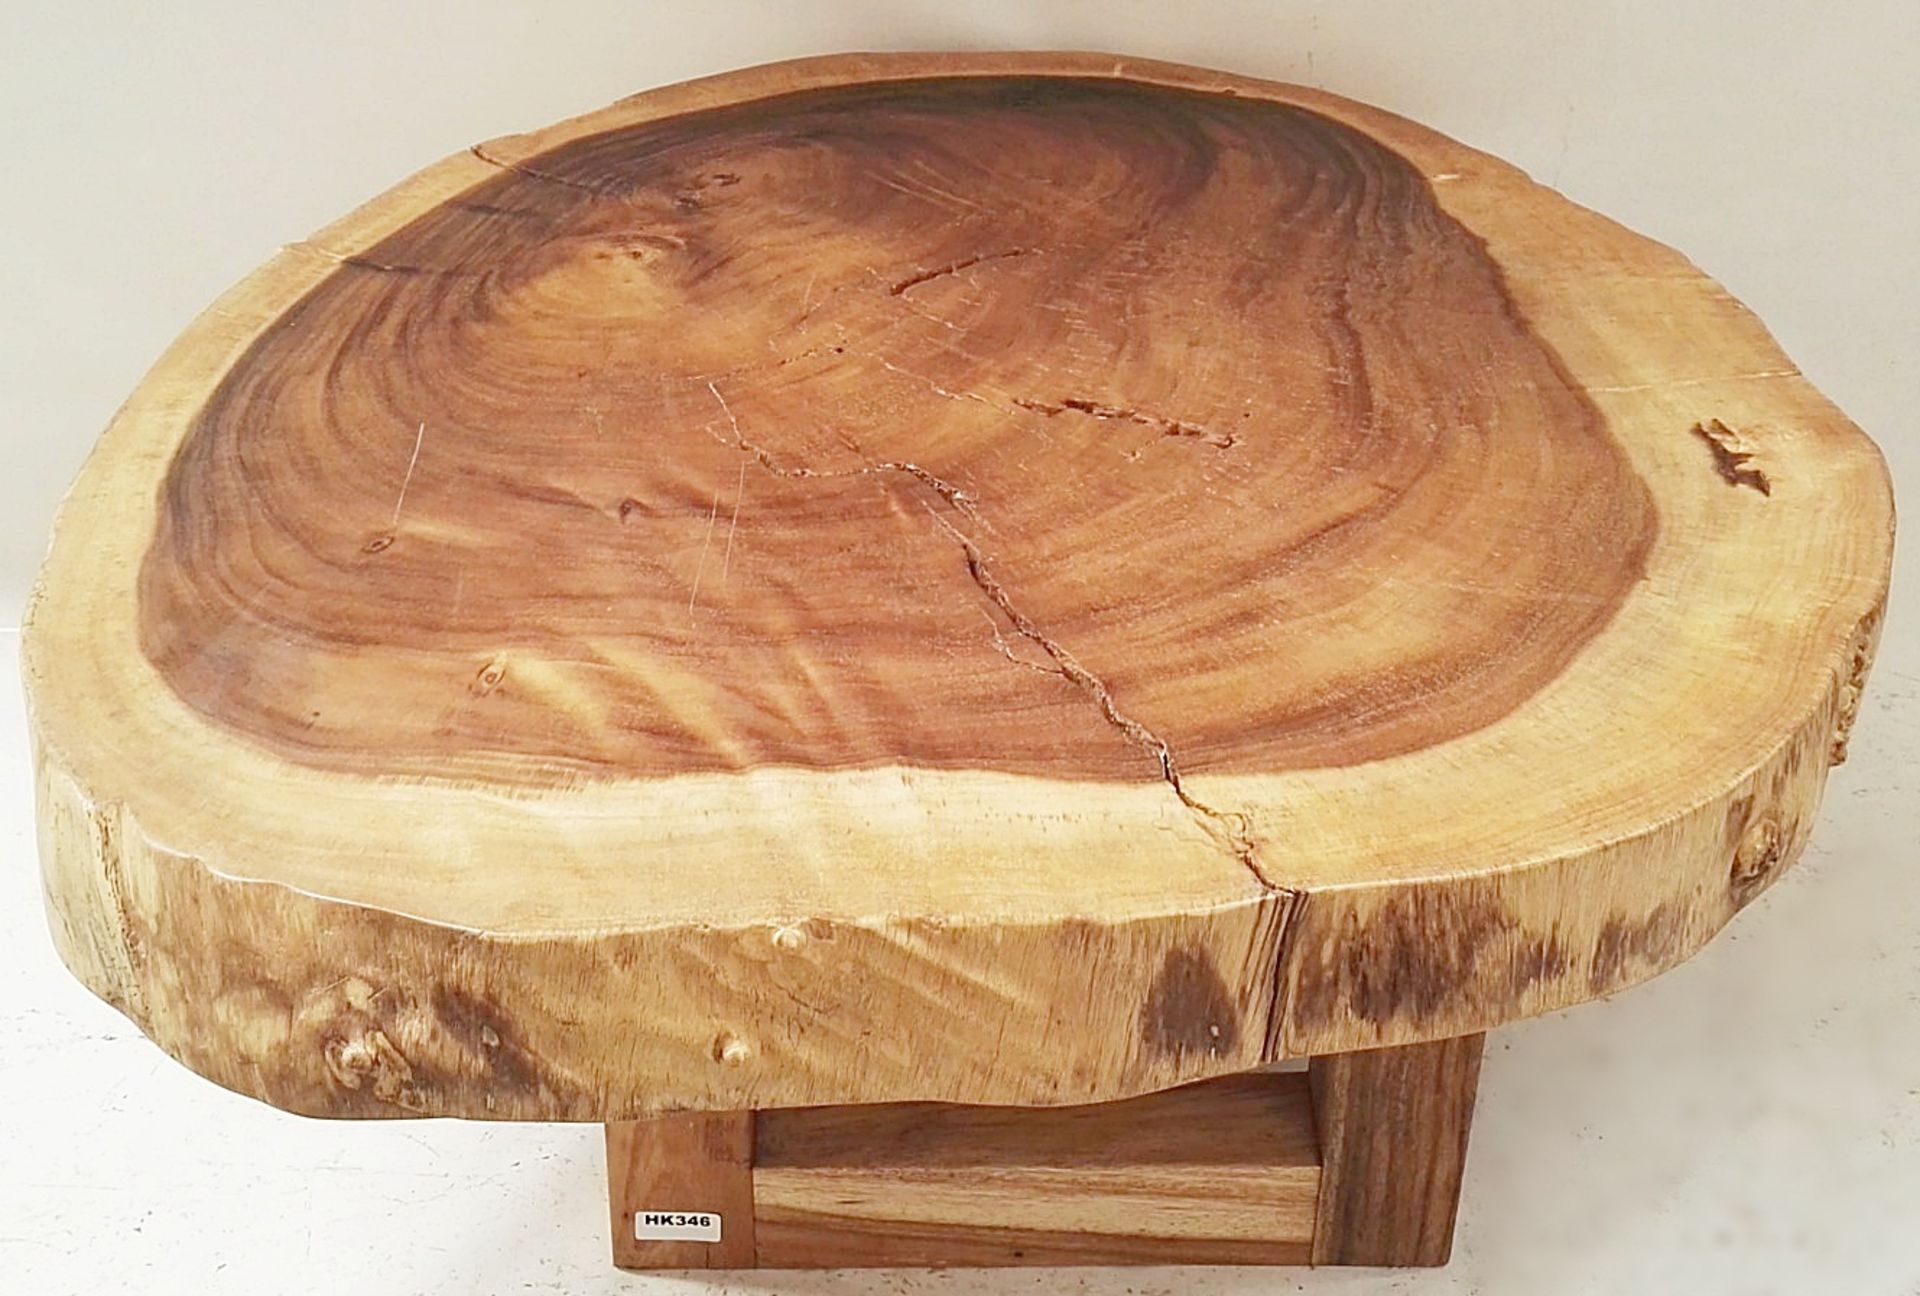 1 x Unique Reclaimed Solid Tree Trunk Coffee Table With Square Base - Image 3 of 5